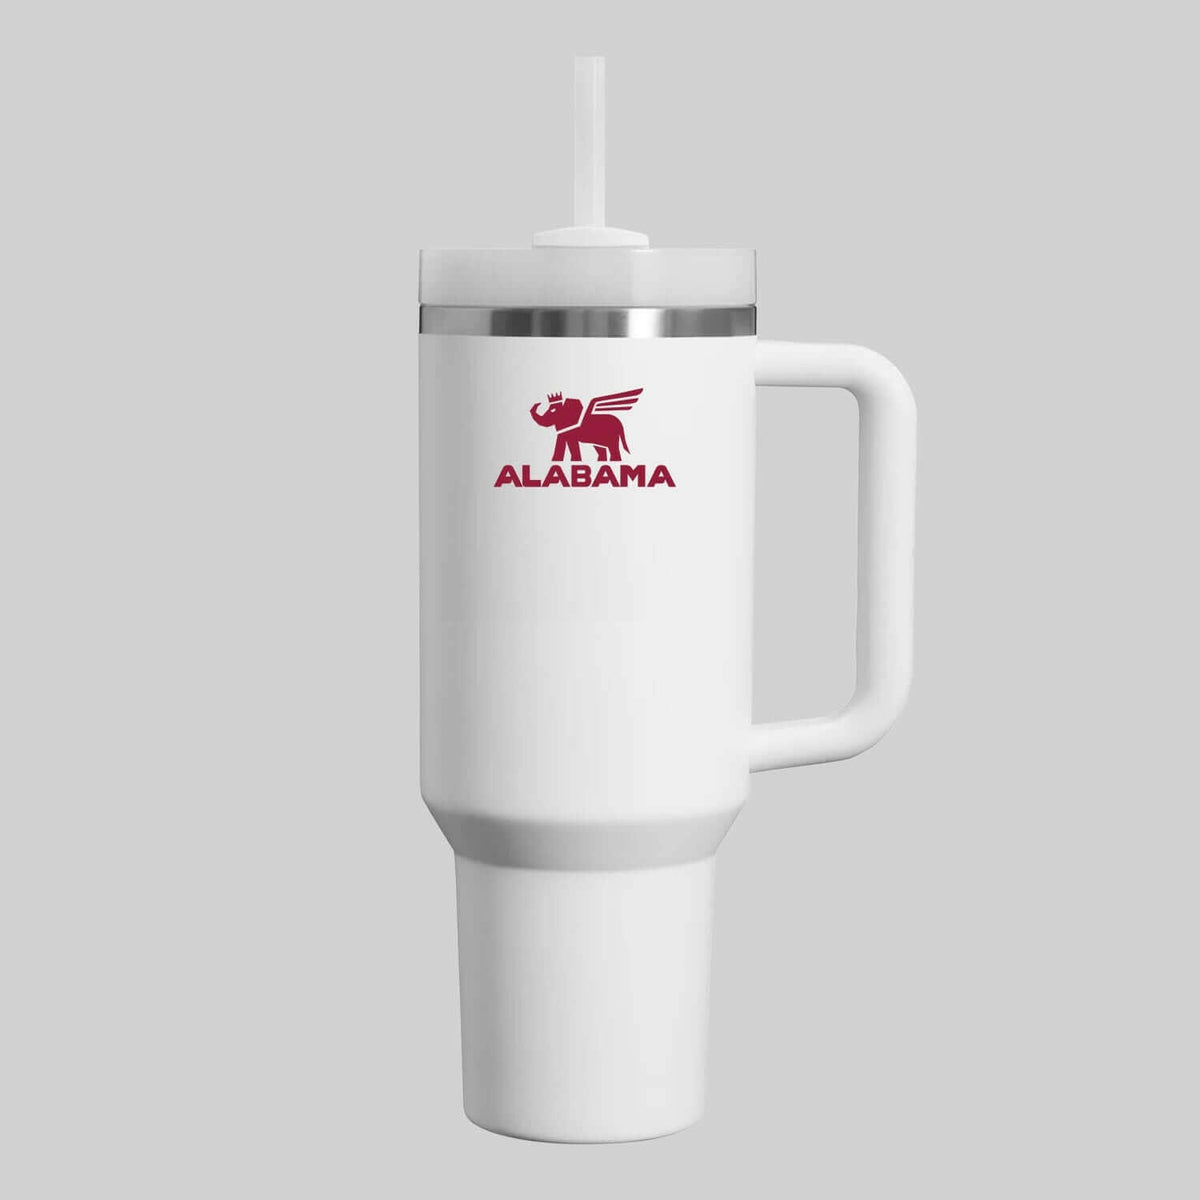 alabama crimson tide cups, alabama png, university of alabama cups, alabama tumbler ideas, alabama cups, alabama white tide, alabama tervis tumbler, sports themed laptop case, Football Christmas stocking, Football iPhone case, Football MacBook Case, College cups, College themed gifts, Sports fan gifts, Cups with names, Name decals for cups, personalized cups with names, Cups with name, cup with name on it, College Stanley cup